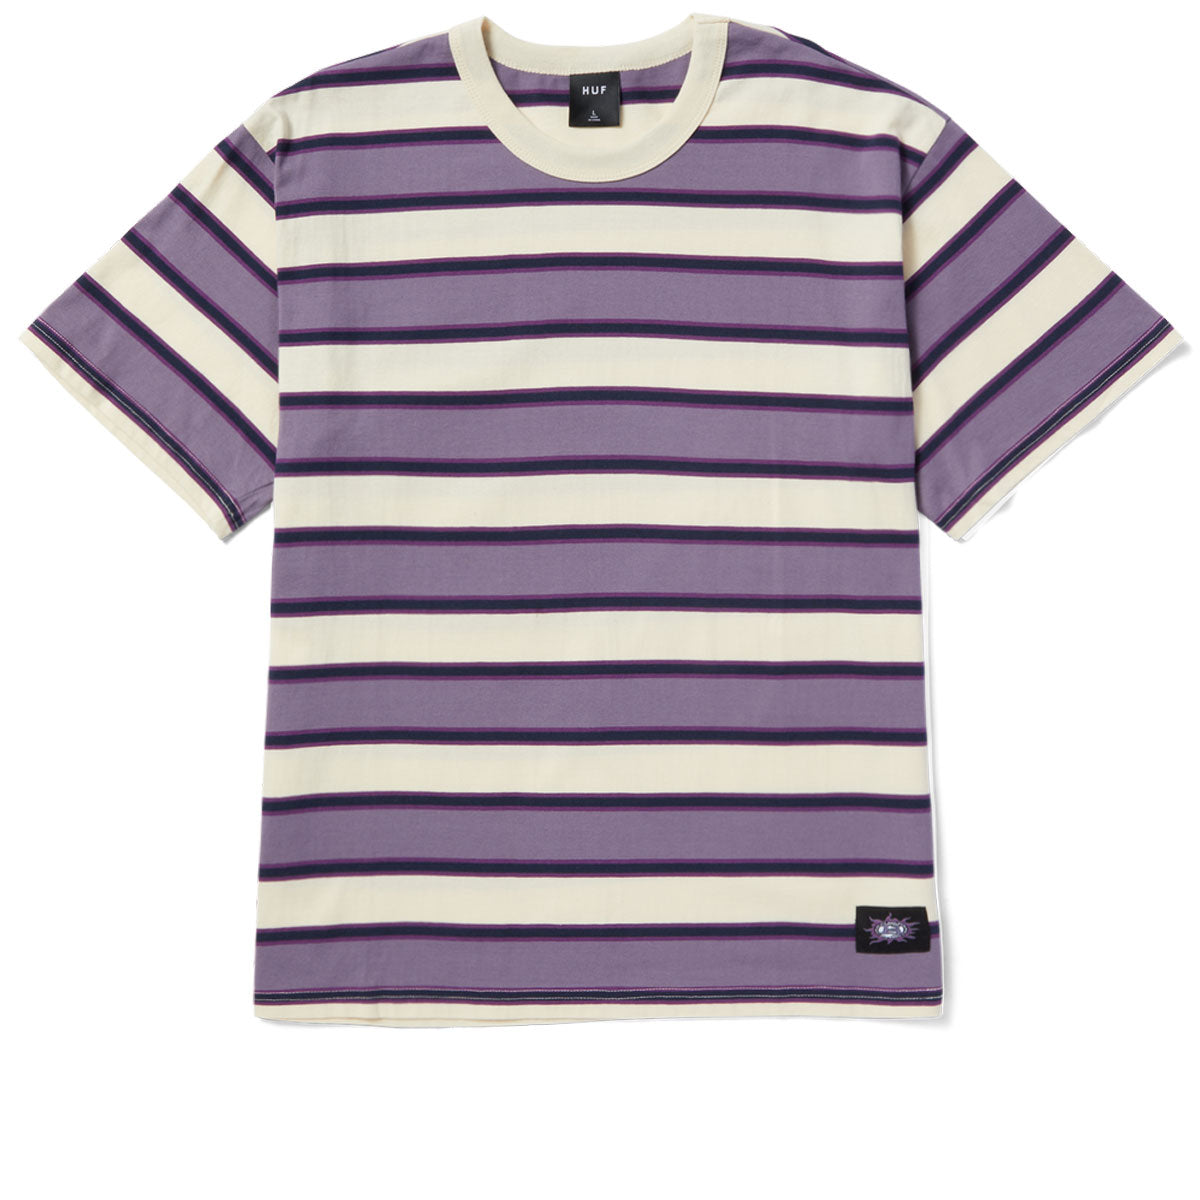 HUF Terrace Relaxed Knit Shirt - Dust Purple image 1